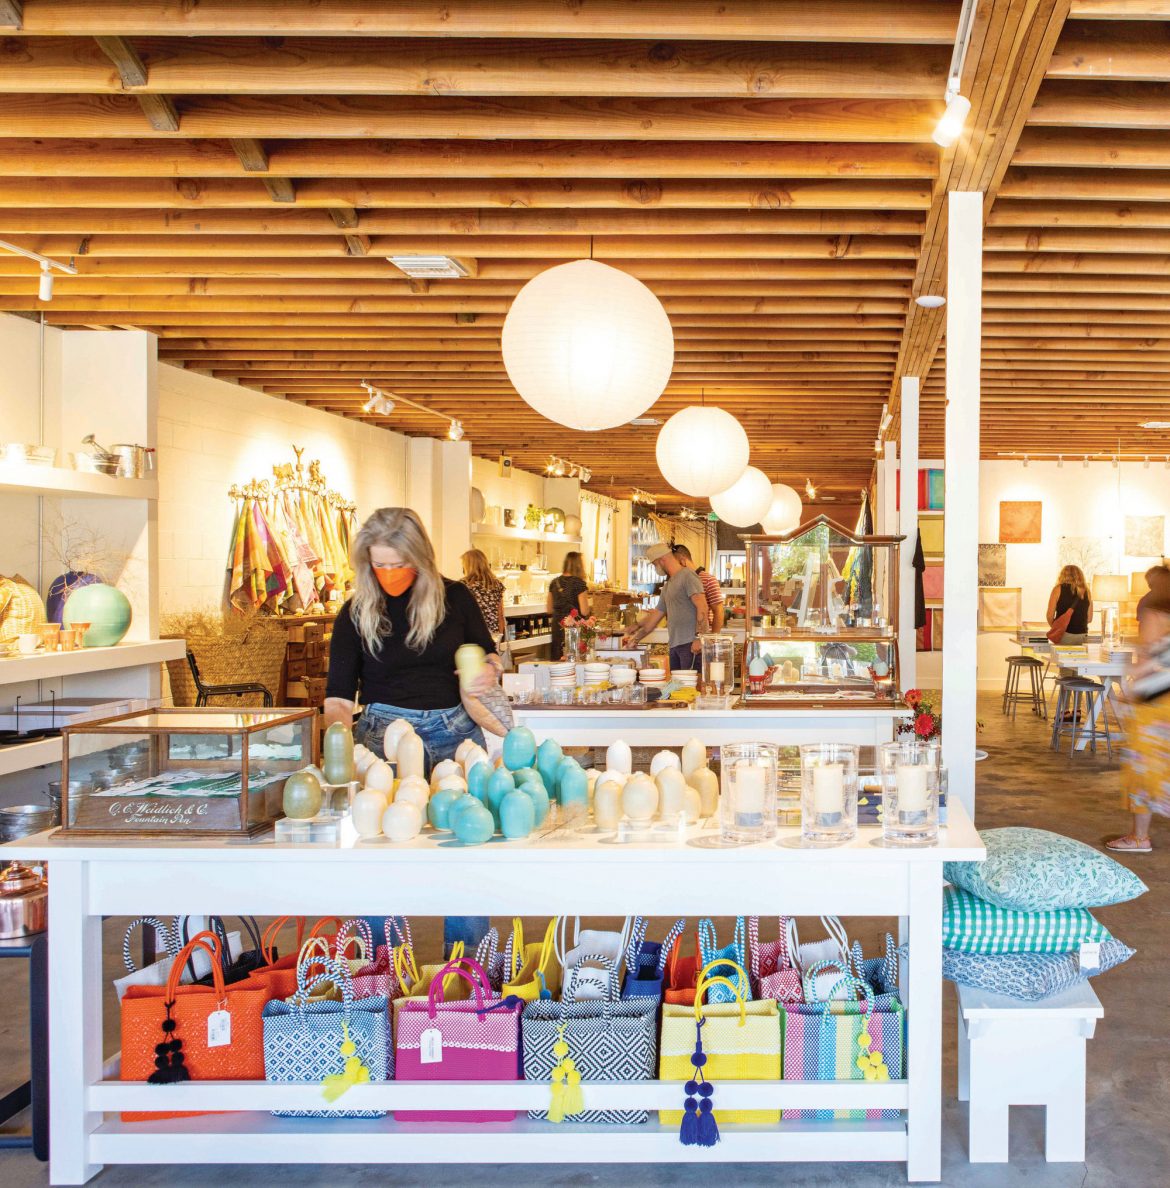 Walla Walla General Store, in a renovated, 70-year-old building where tourists and locals mingle for art classes, knitting groups and thematic pop-ups, plus merchandise of purpose and elegance.